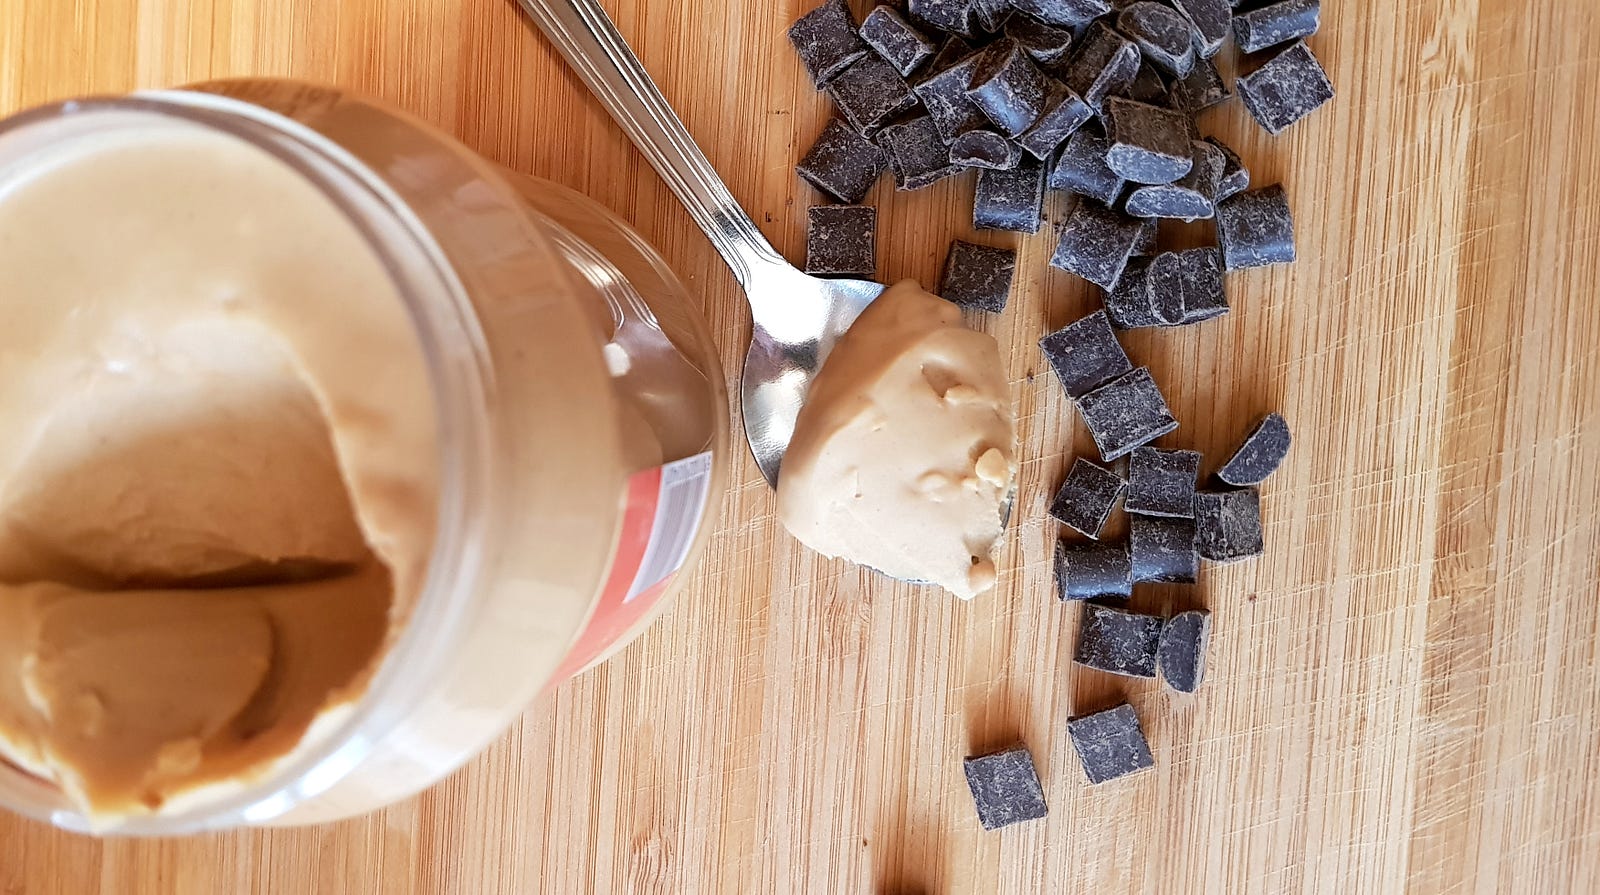 Peanut butter and dark chocolate are typically tolerated well by people with IBS.